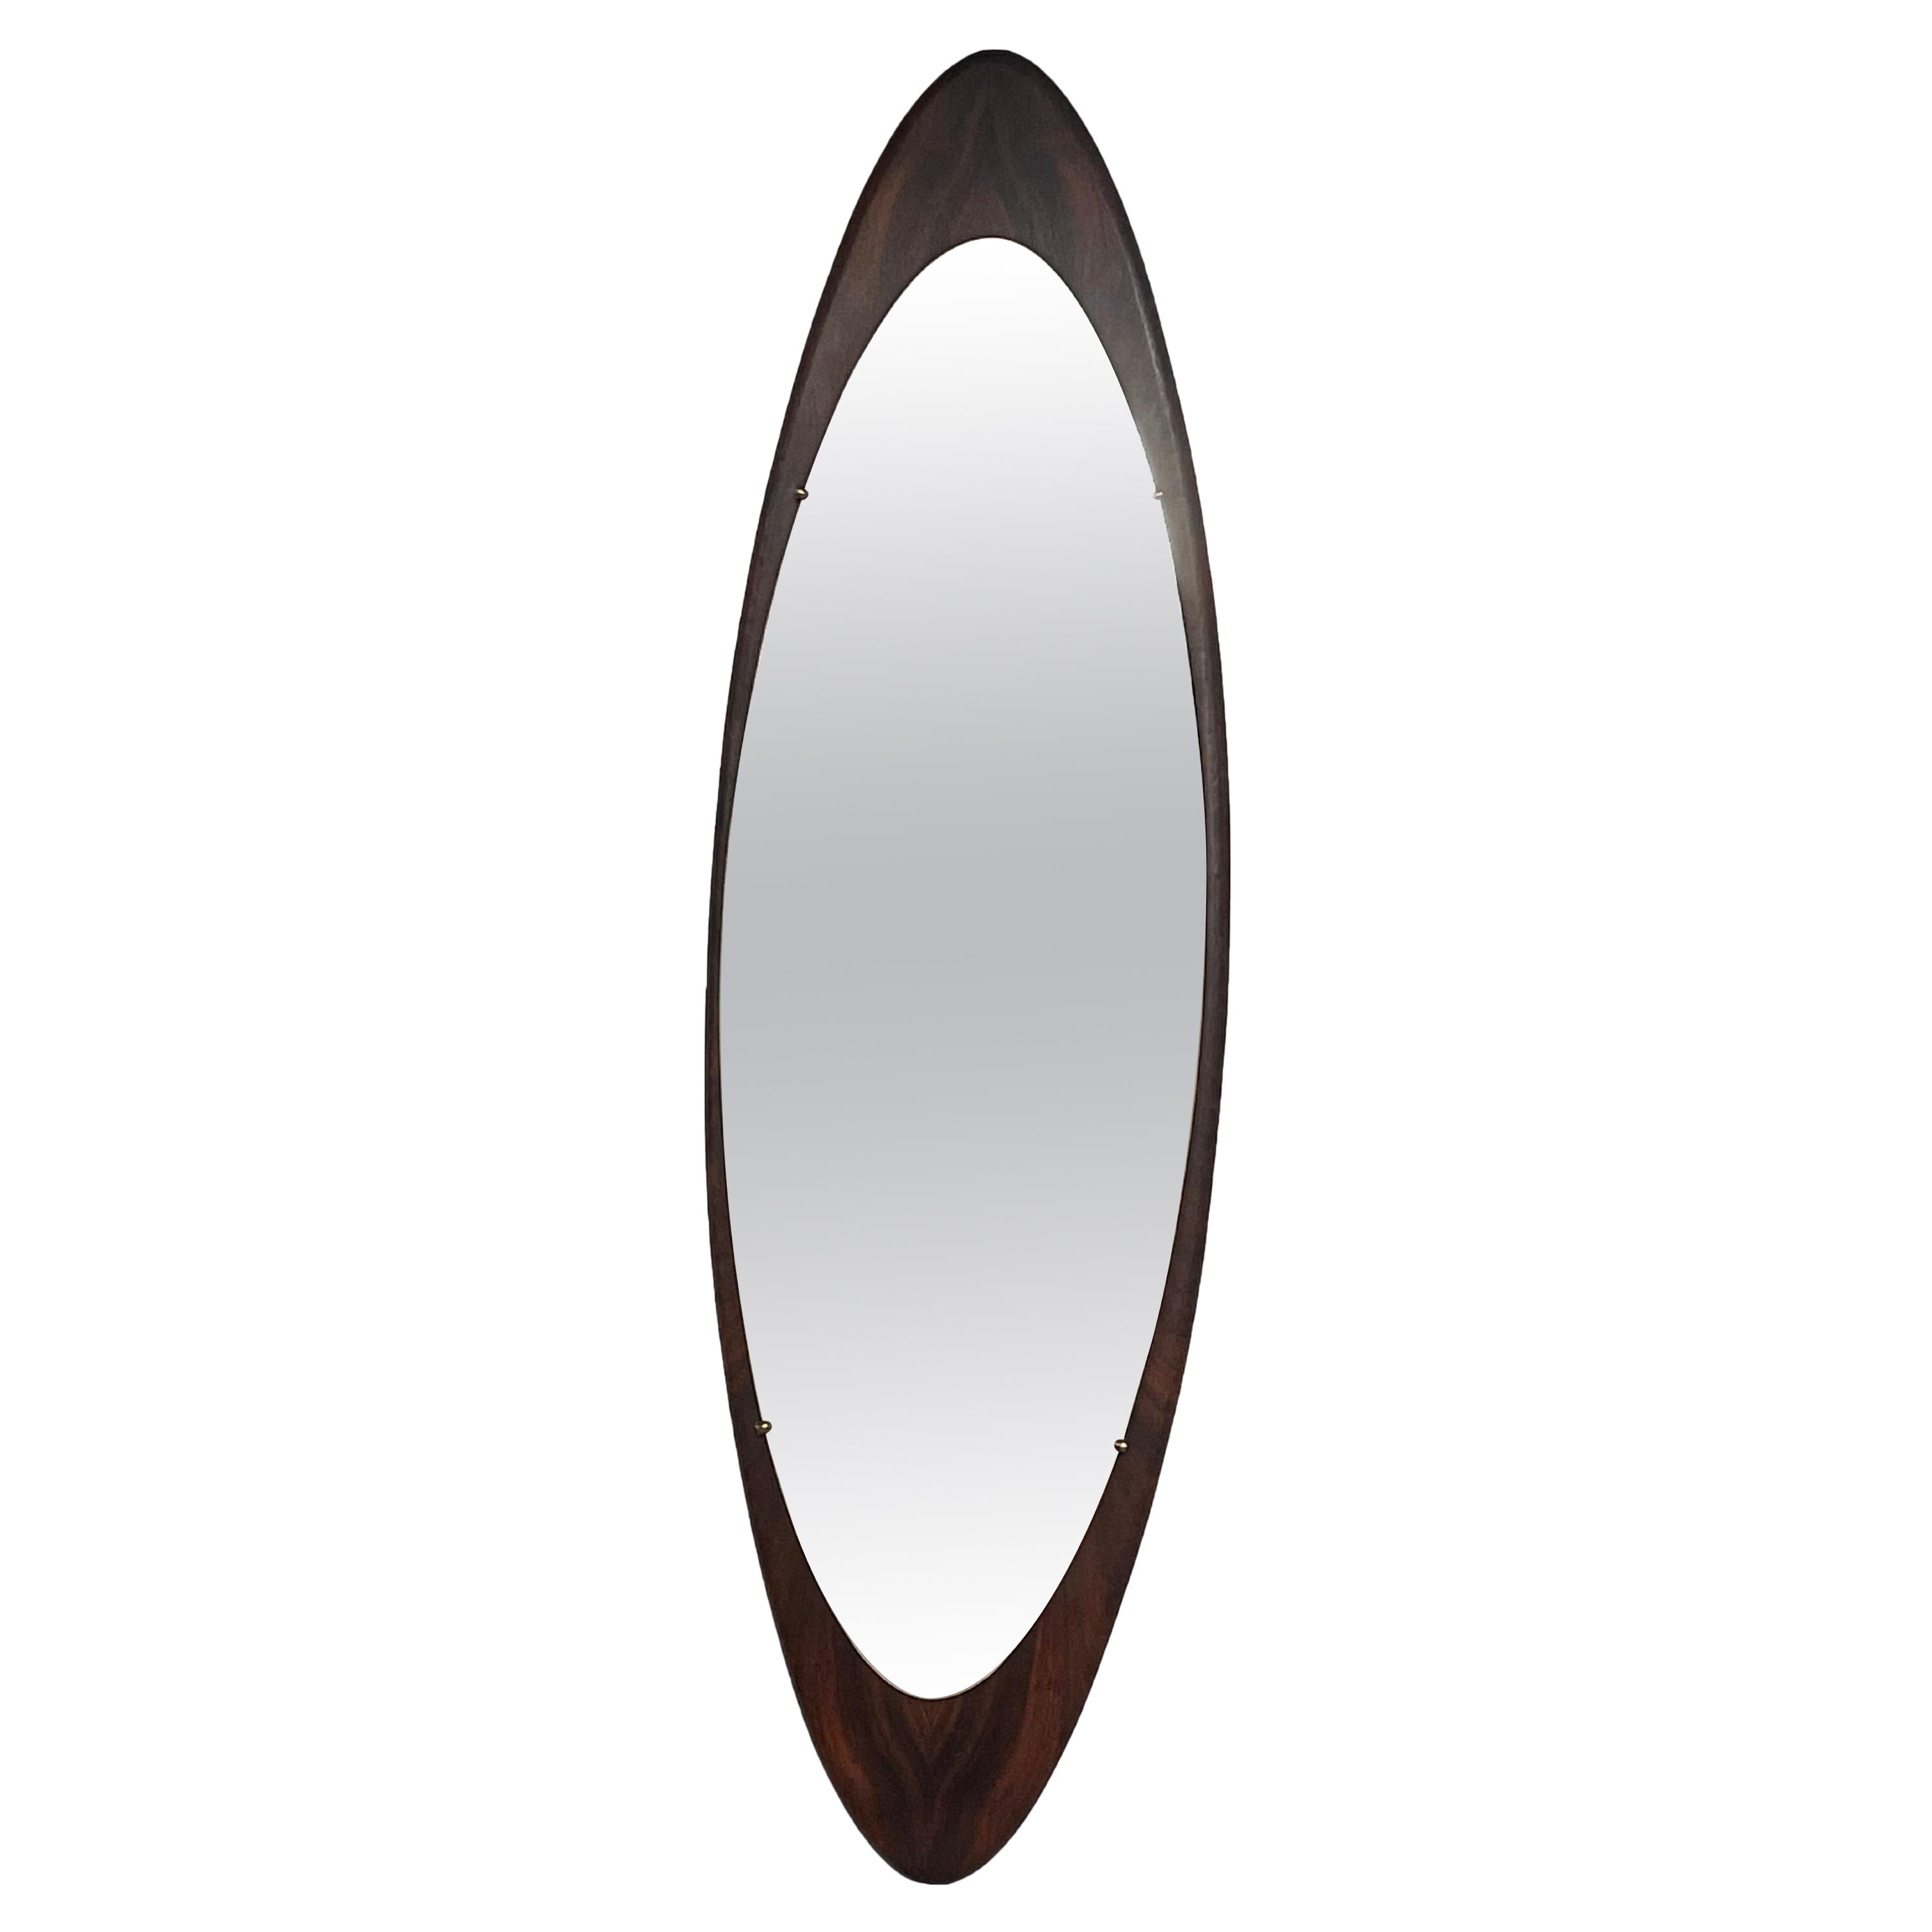 Large 1960s oval mirror of Italian manufacture